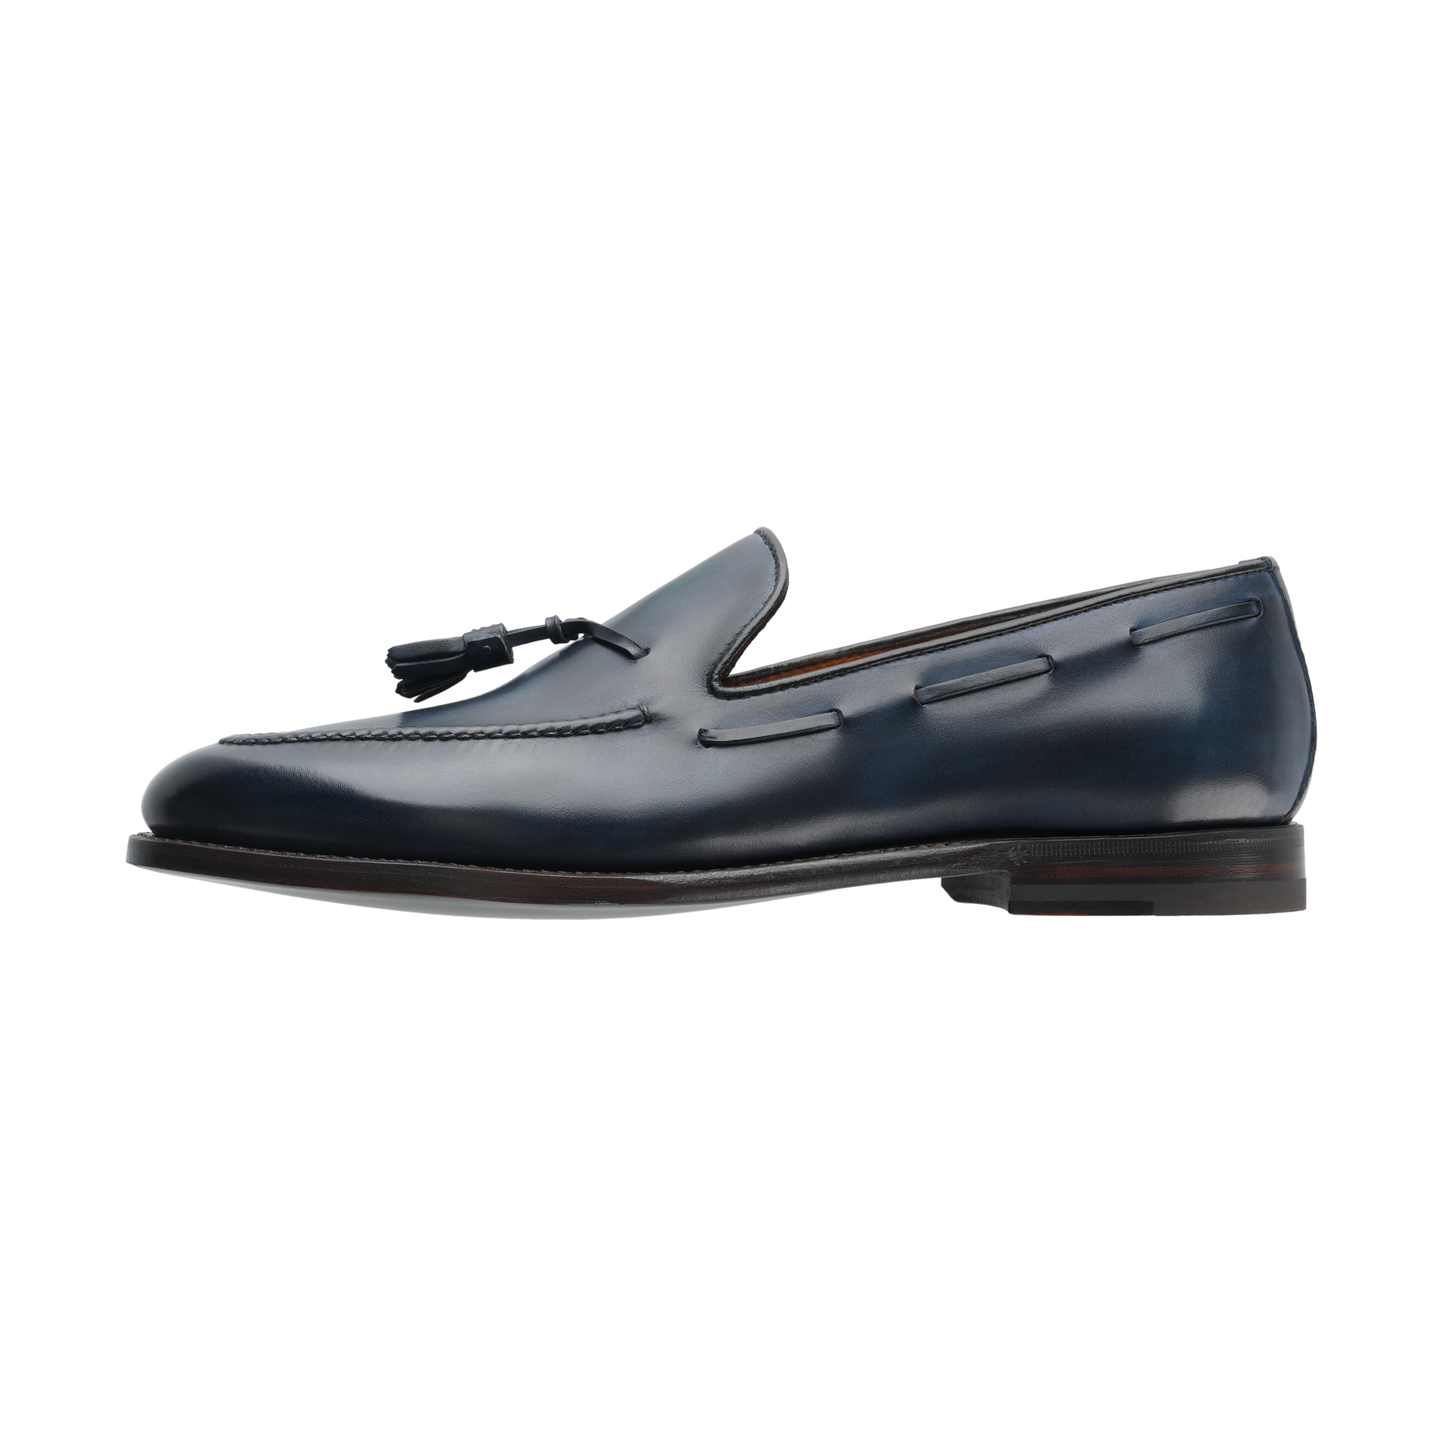 Bontoni «Conte Max Vintage» Leather Tassel Loafer with Hand-Stitched Apron in Blue - SARTALE